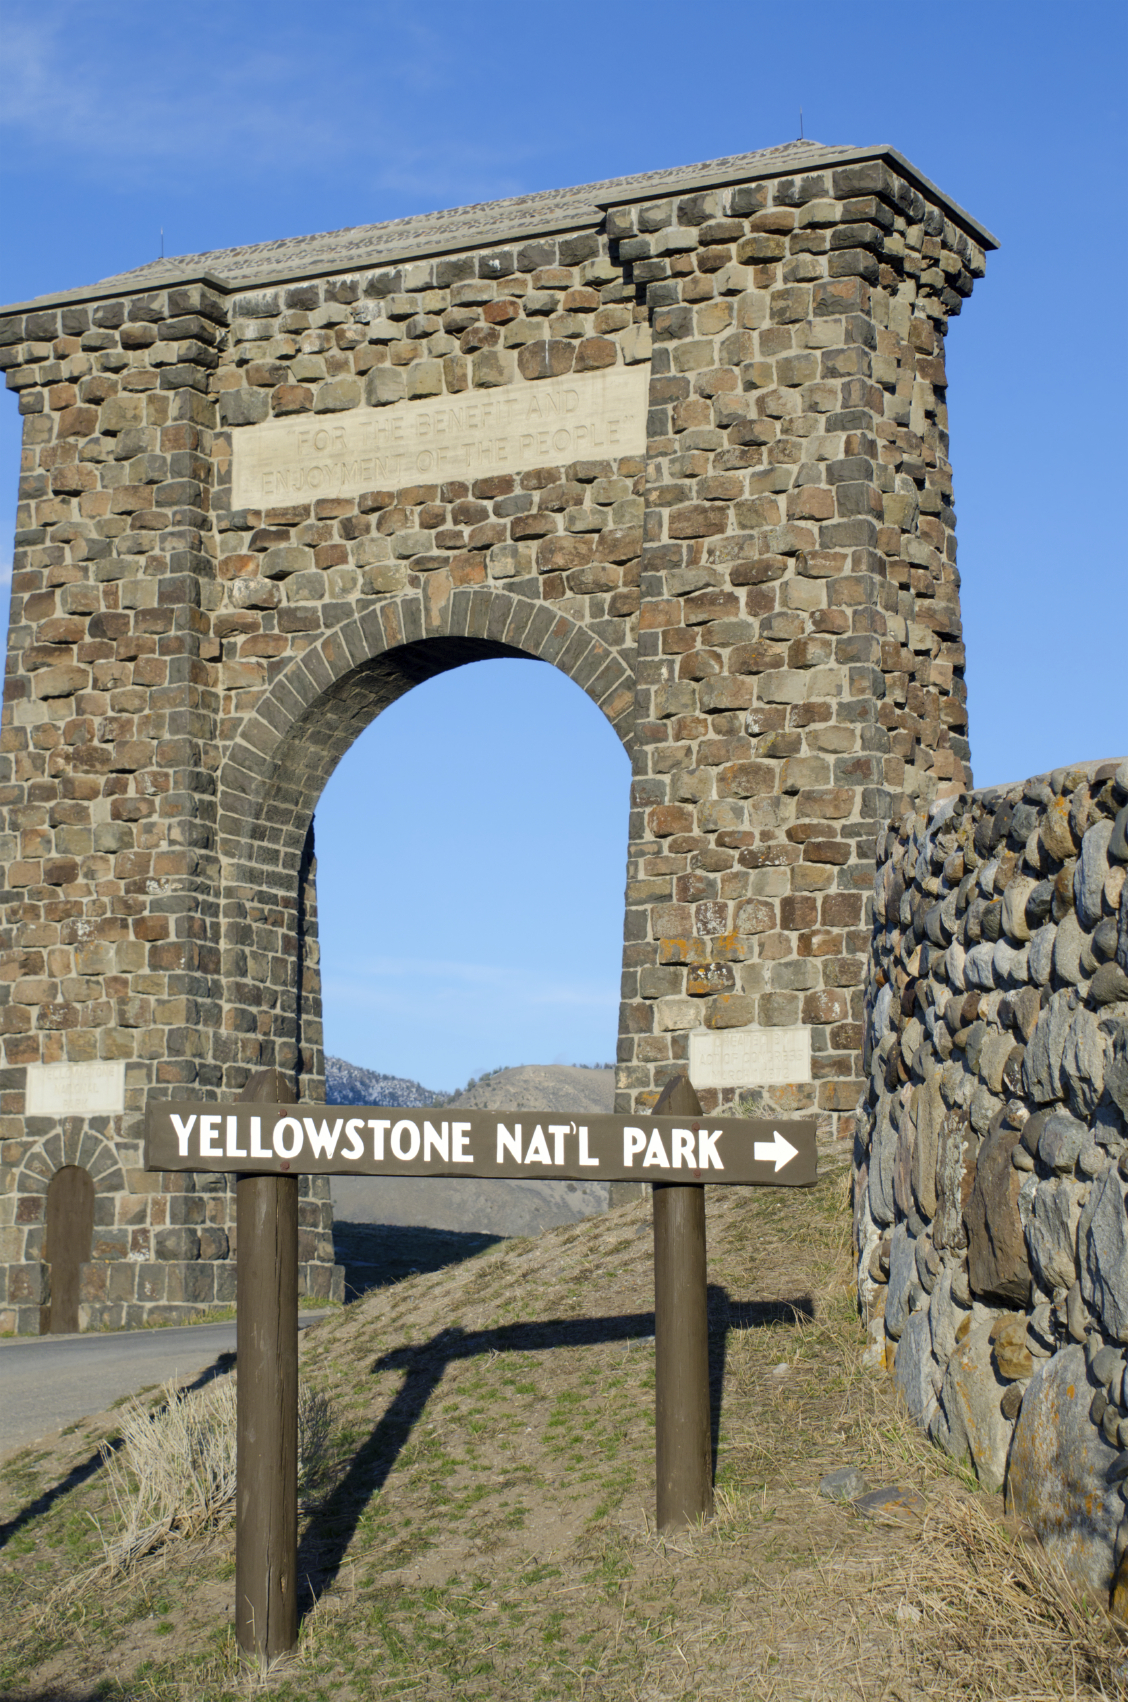  This gate shouldn’t have to be a funnel. An open data platform will open public lands to underserved communities. Yellowstone Gate by iStock/BirdImages.